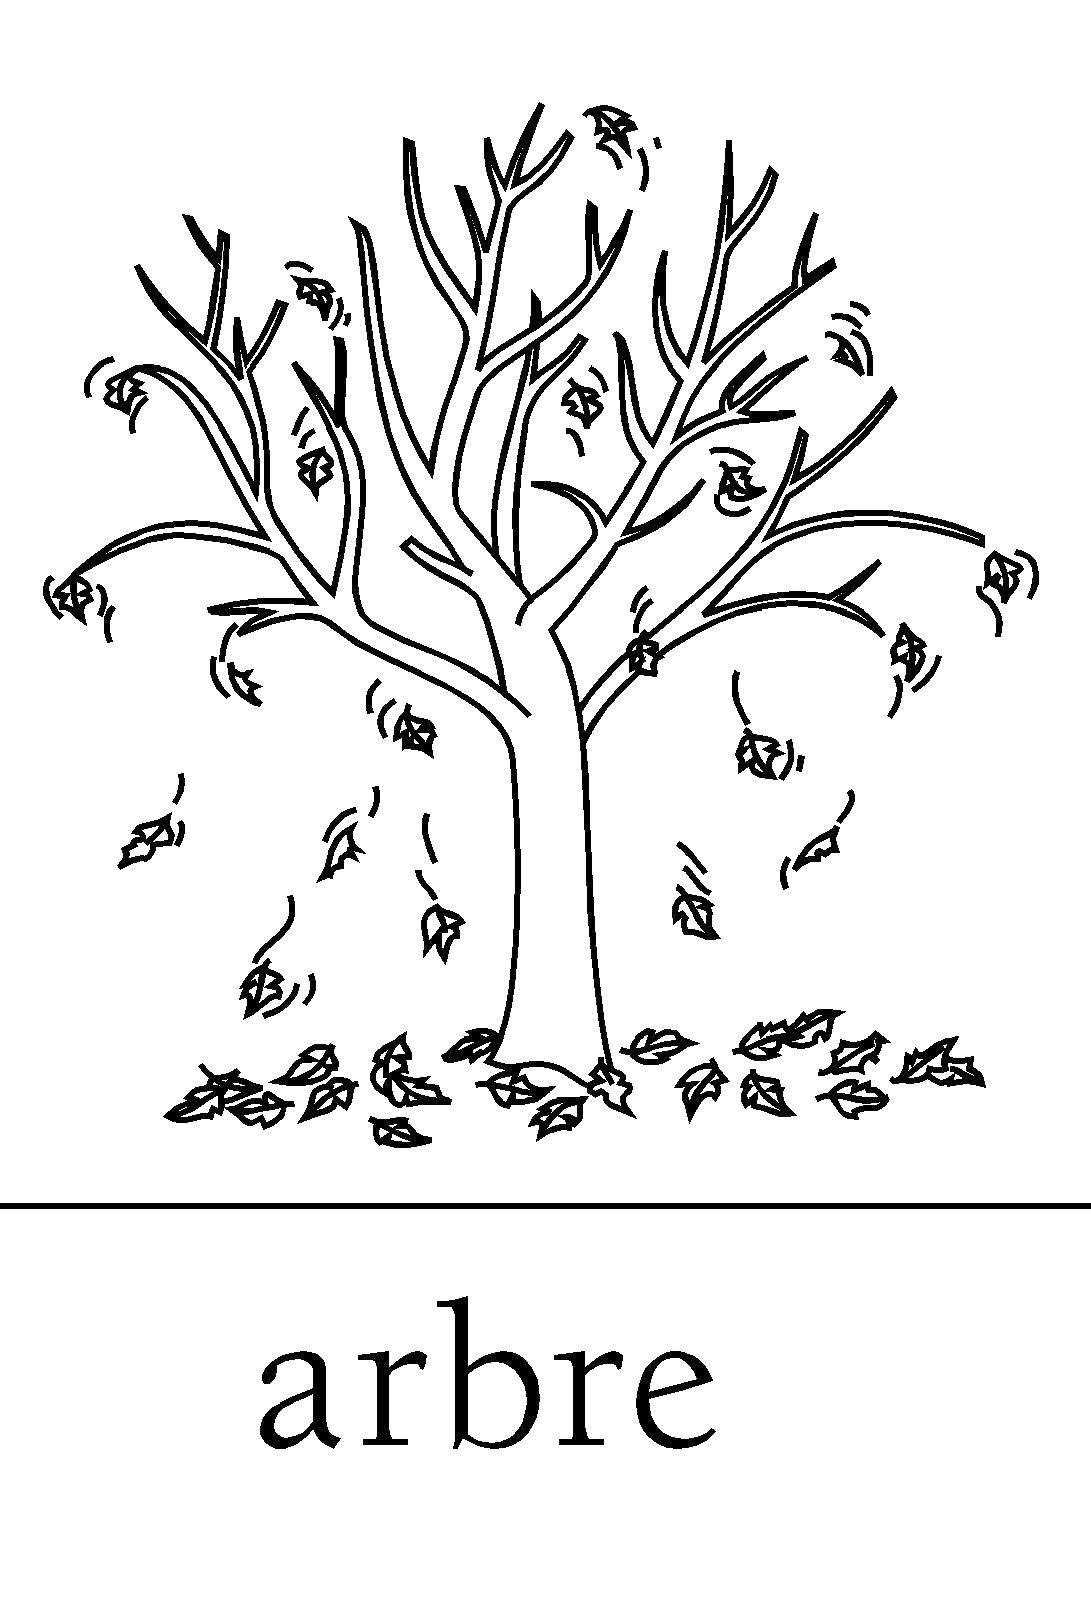 Coloring Tree without leaves. Category tree. Tags:  tree, leaves.